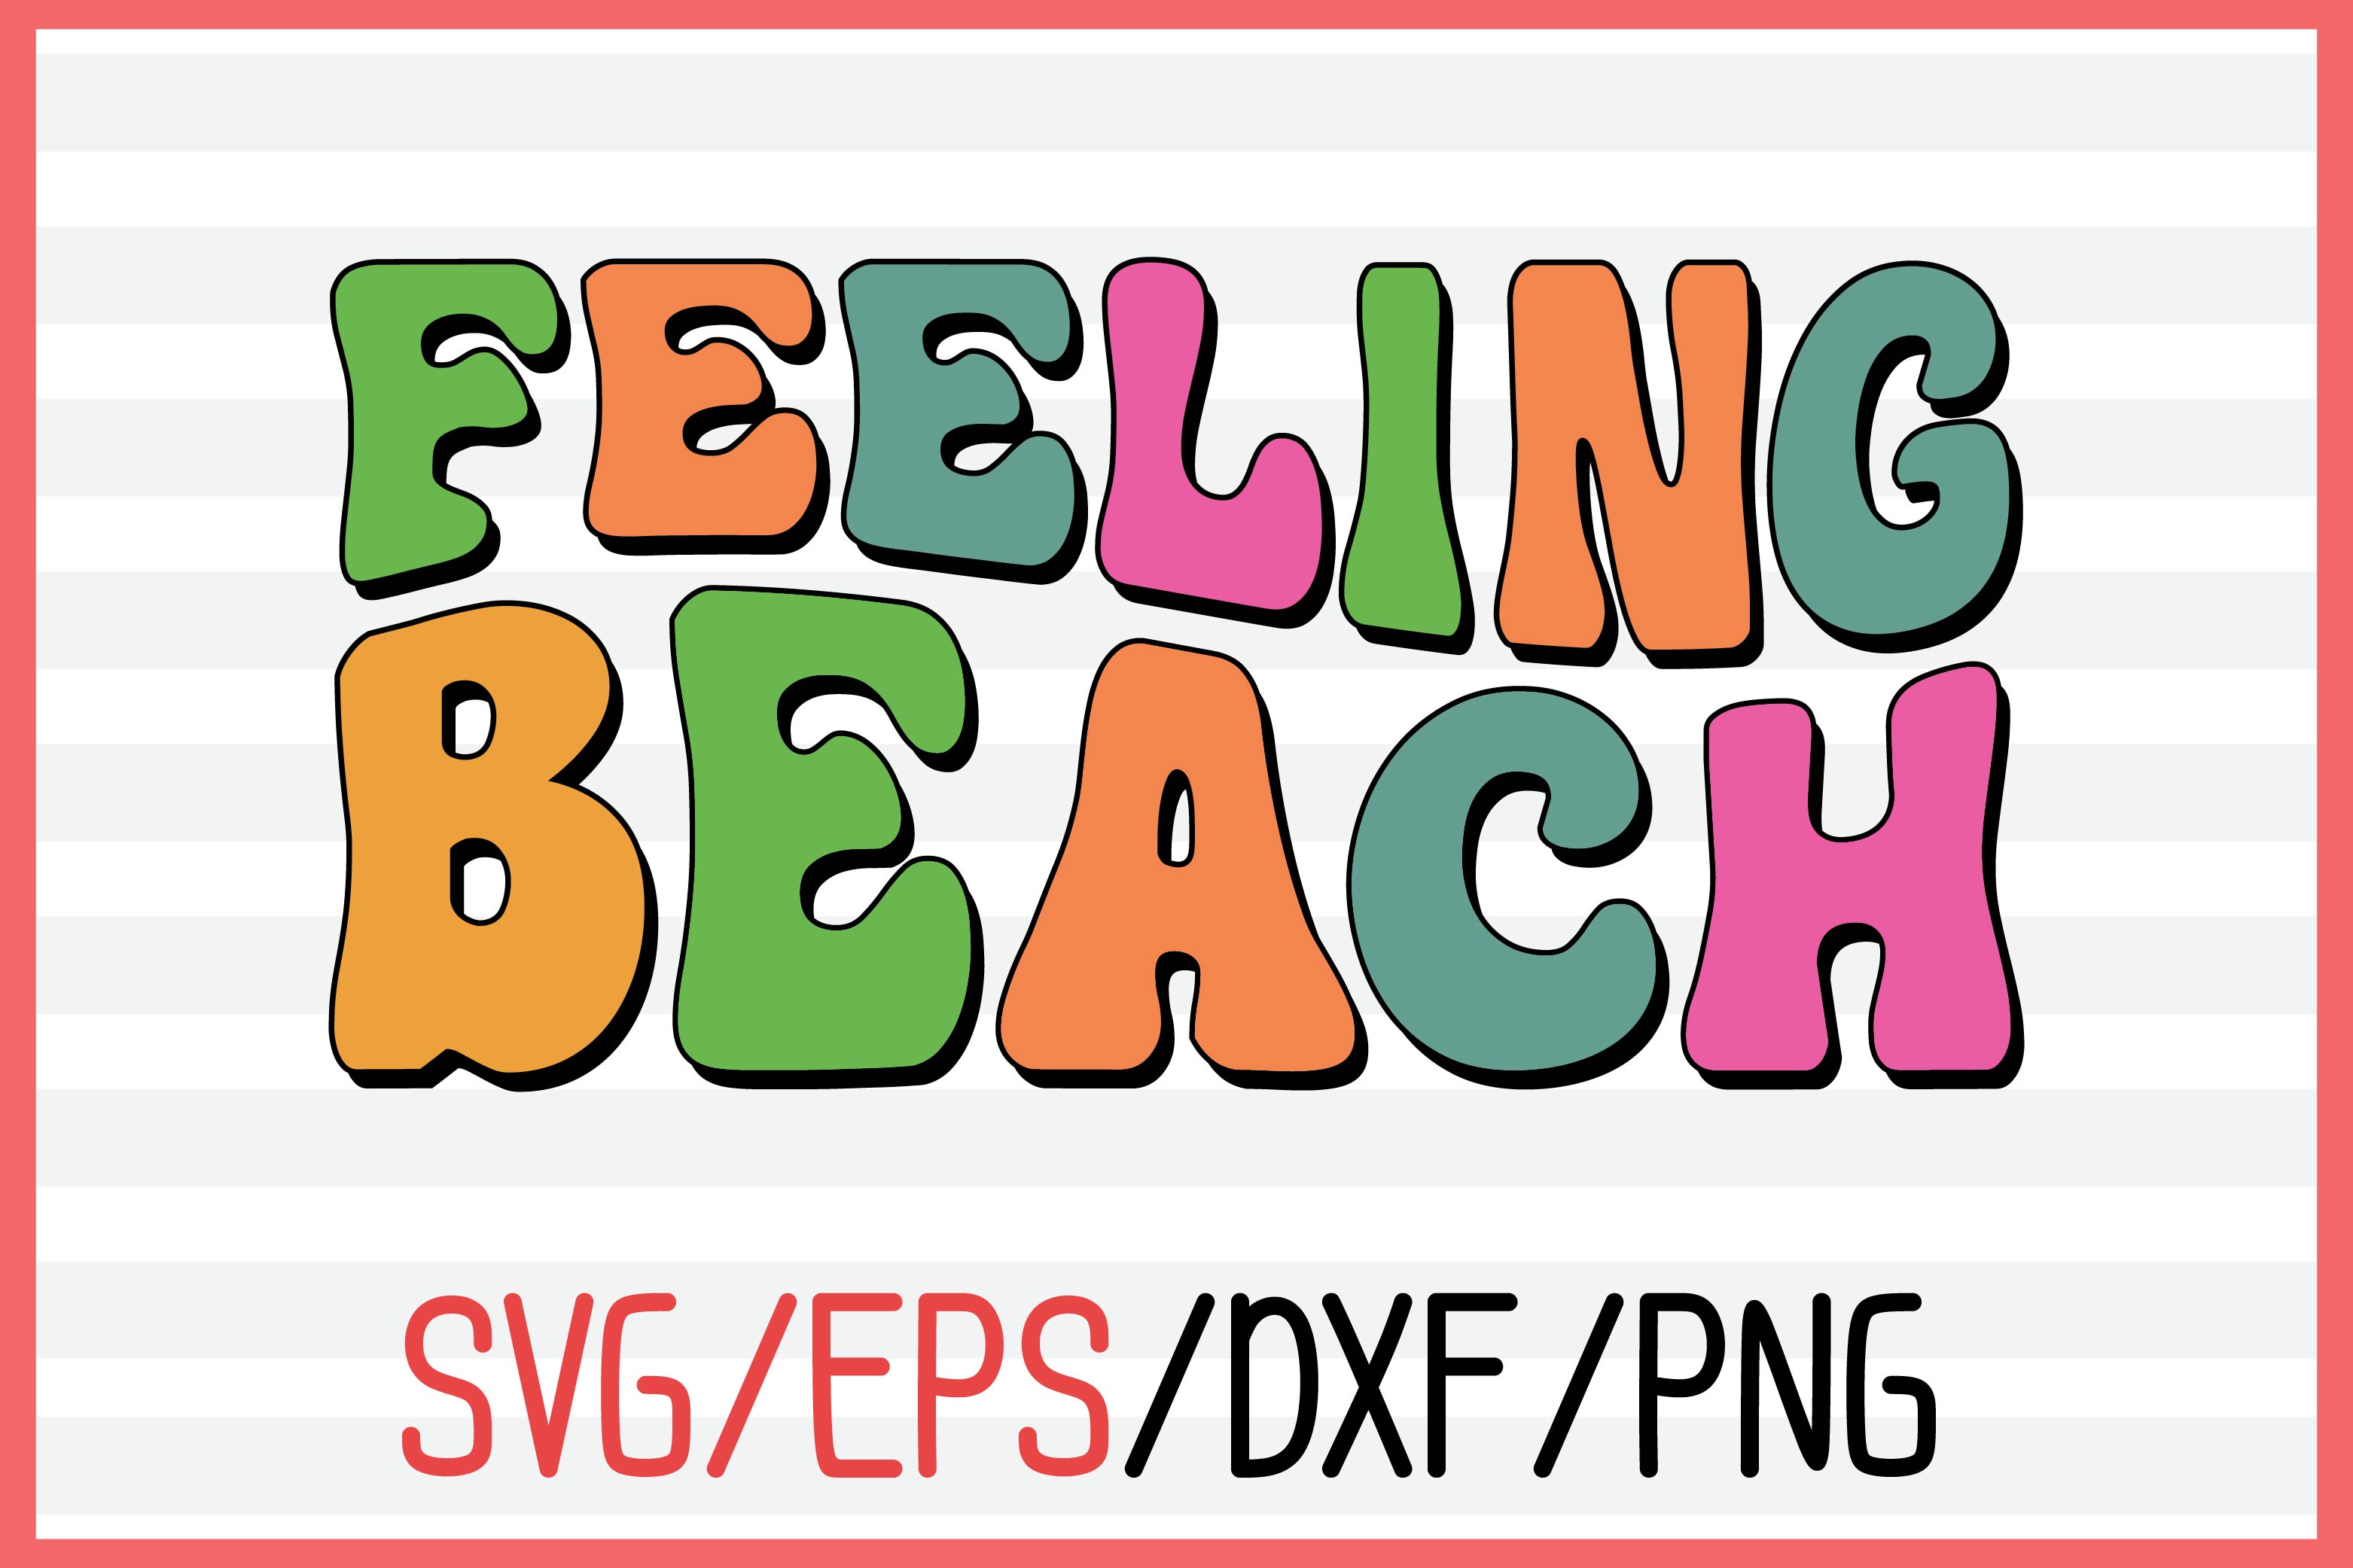 About Feeling beach retro svg design pinterest preview image.